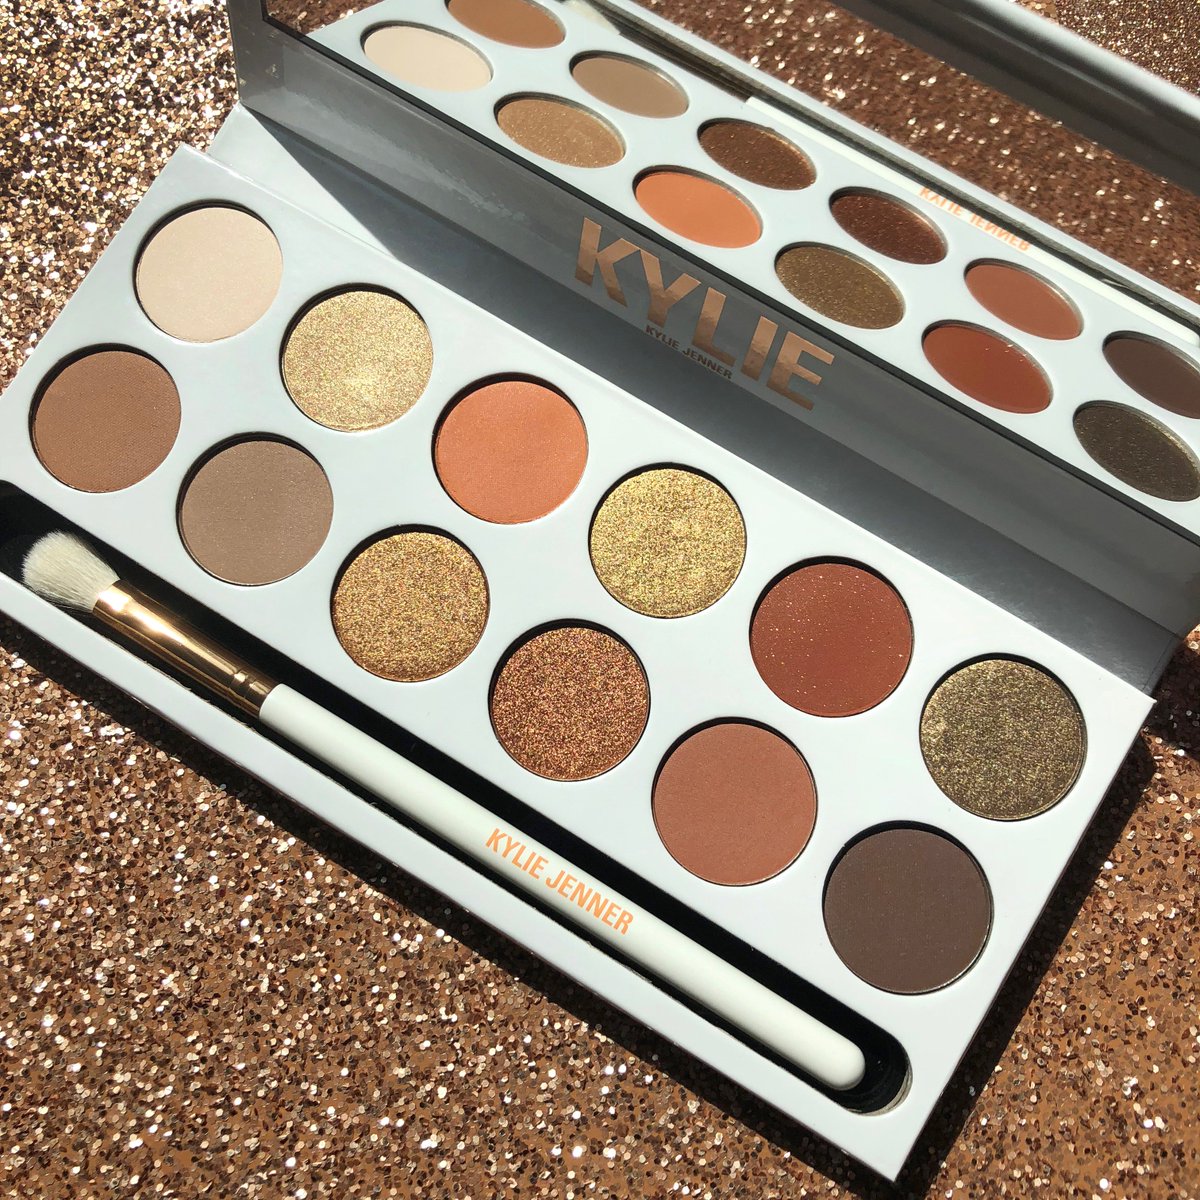 my bronze extended palette is back in stock at https://t.co/bDaiohhXCV https://t.co/xpUWSn26ju